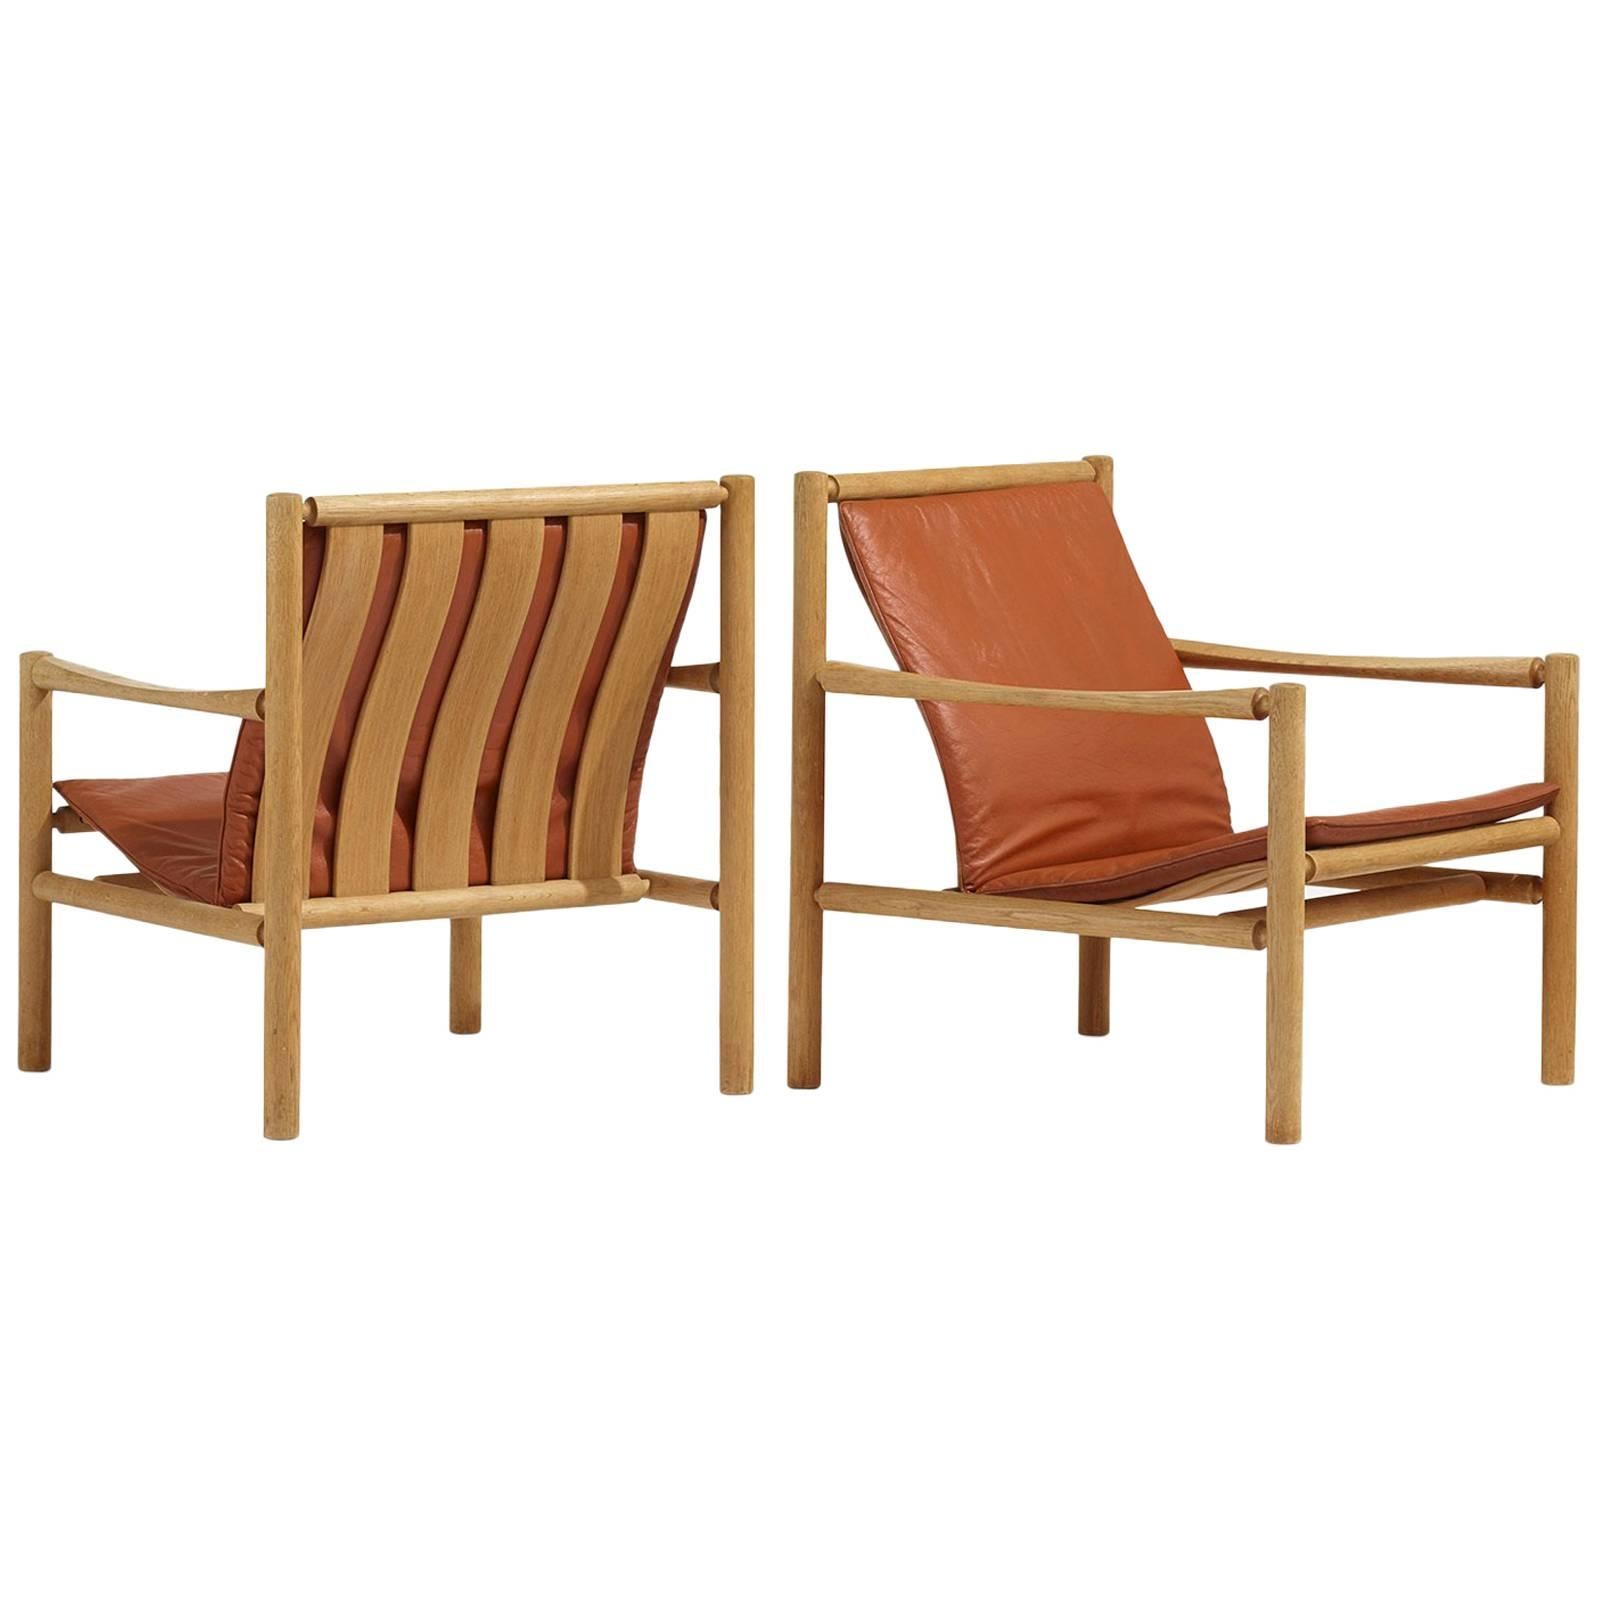 Pair of Lounge Chairs by Jorgen Nilsson for J.H. Johansens Eftf For Sale